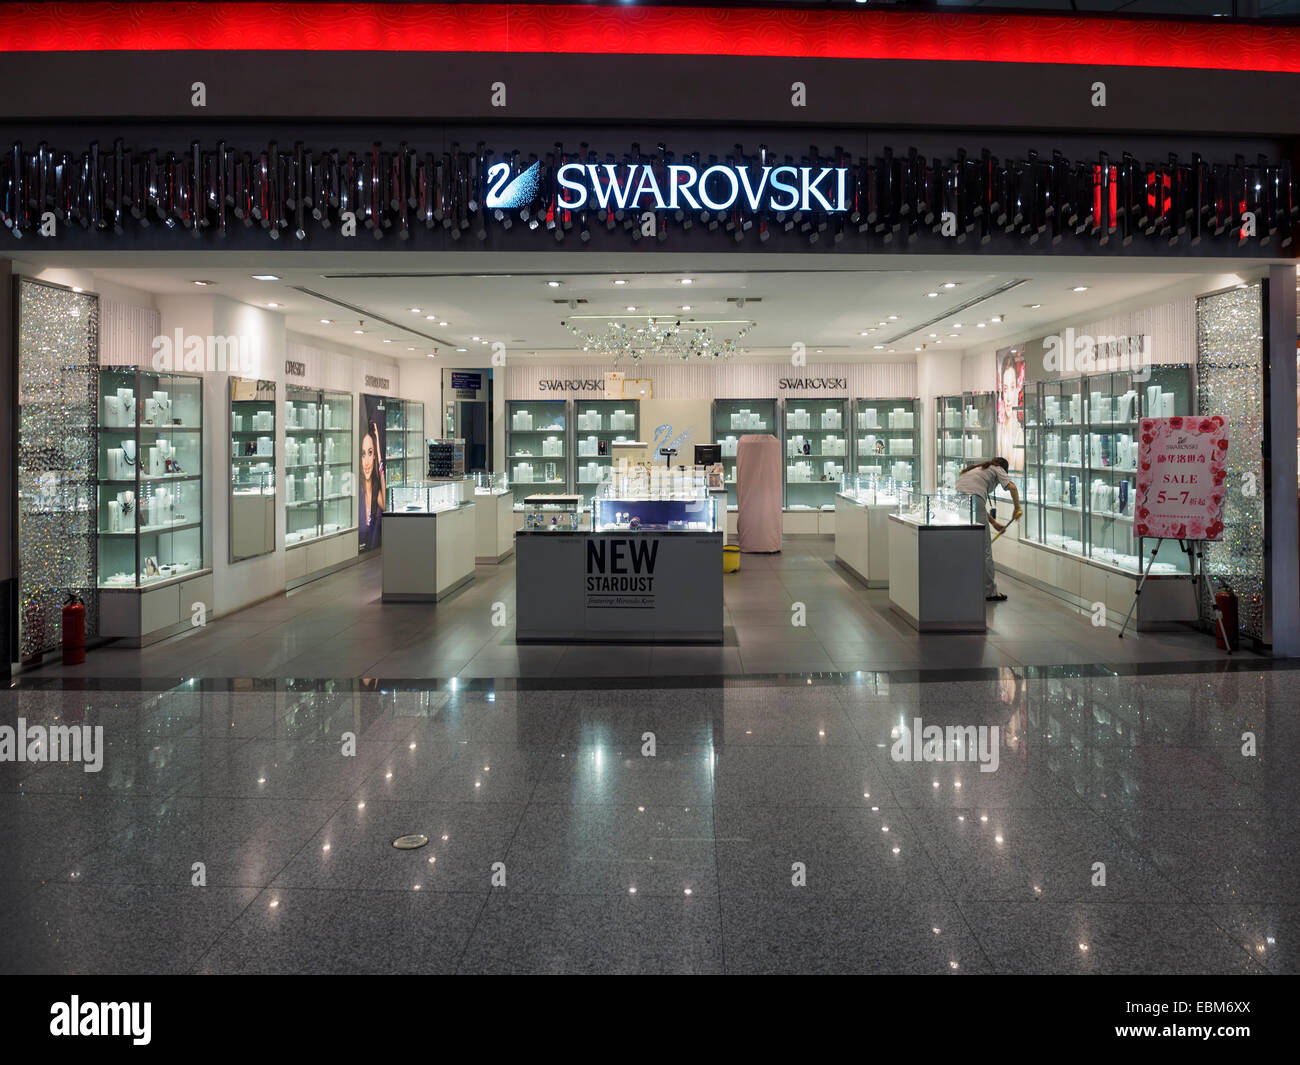 Swarovski Store High Resolution Stock Photography and Images - Alamy